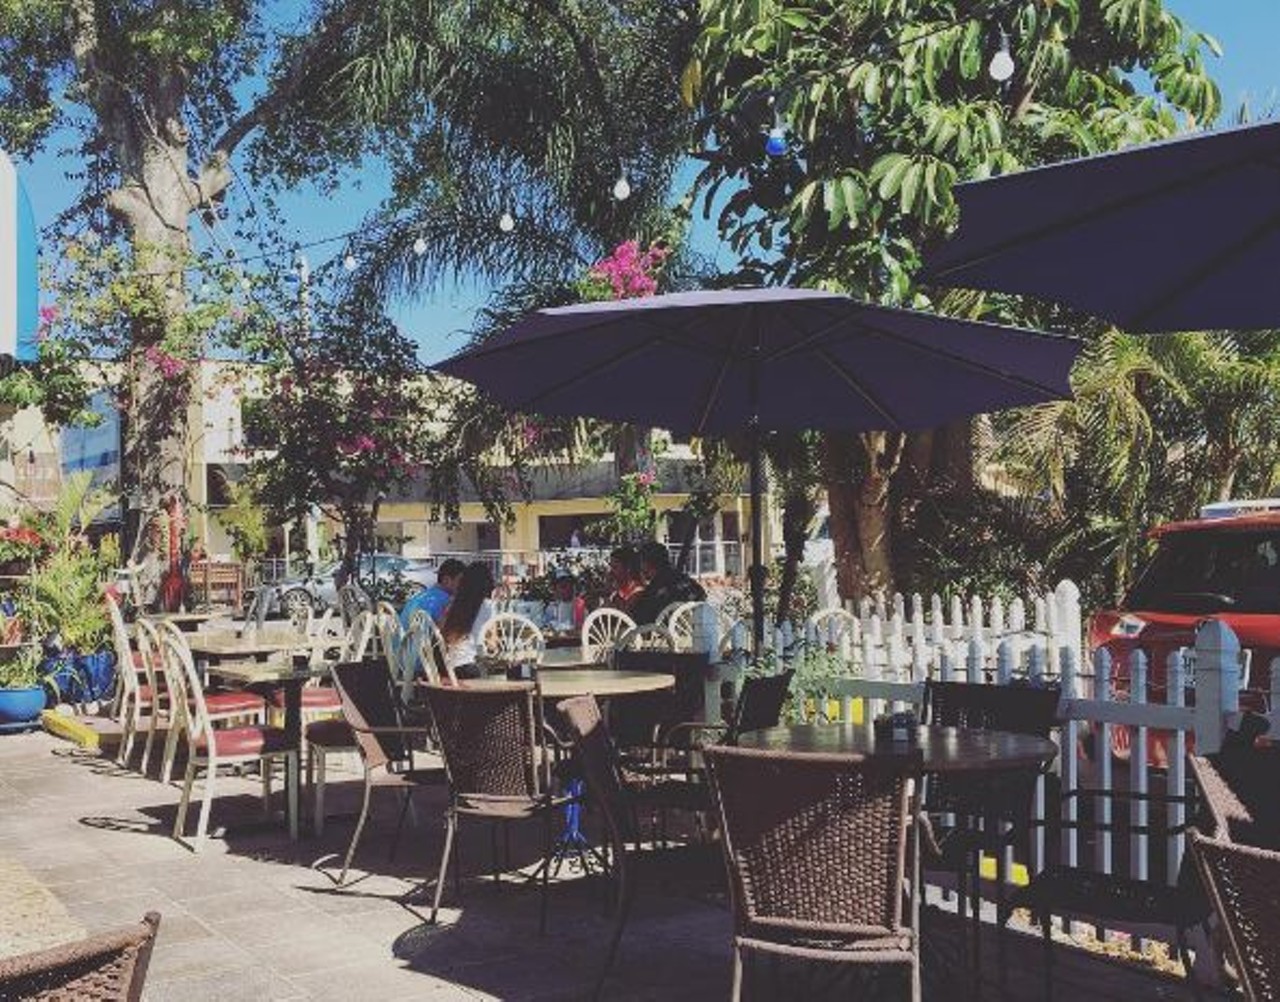 Greek Corner
1600 N. Orange Ave, 407-228-0303
Its blue and white color palette is all Stark contrast, but its menu is pure Tyrell - plentiful and exuberant. Come here for Greek inspired cuisine and a seat among its orchids, on the patio. 
Photo via orlandoweekly/Instagram